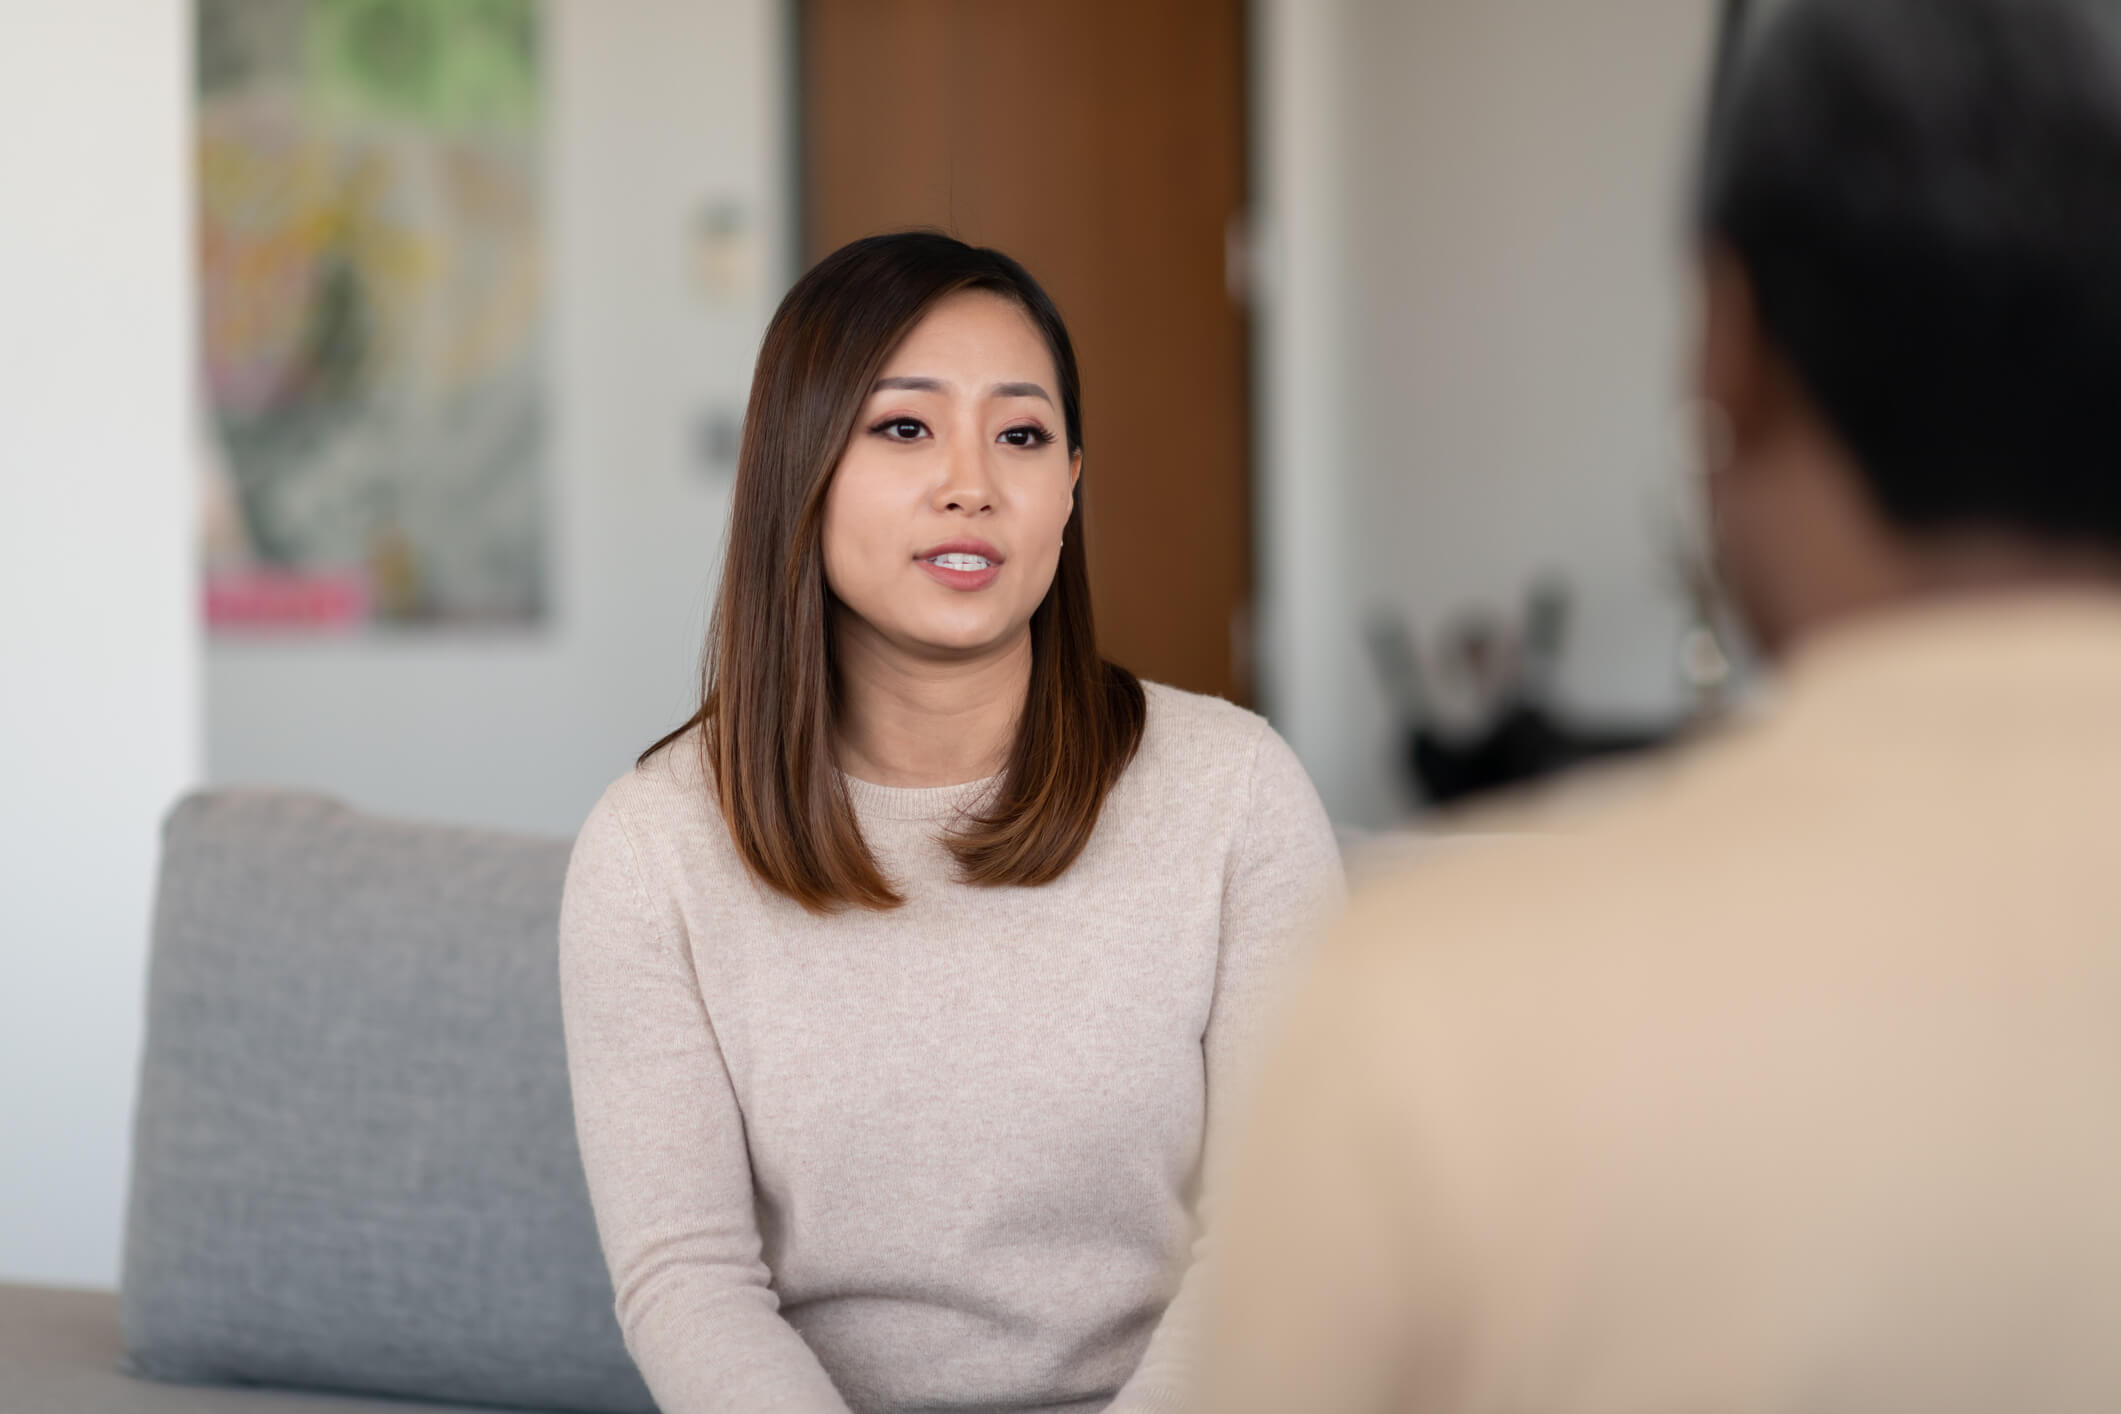 An Asian woman talks to a therapist about her marriage. She is serious about working on her relationship with her husband, but she is frustrated.